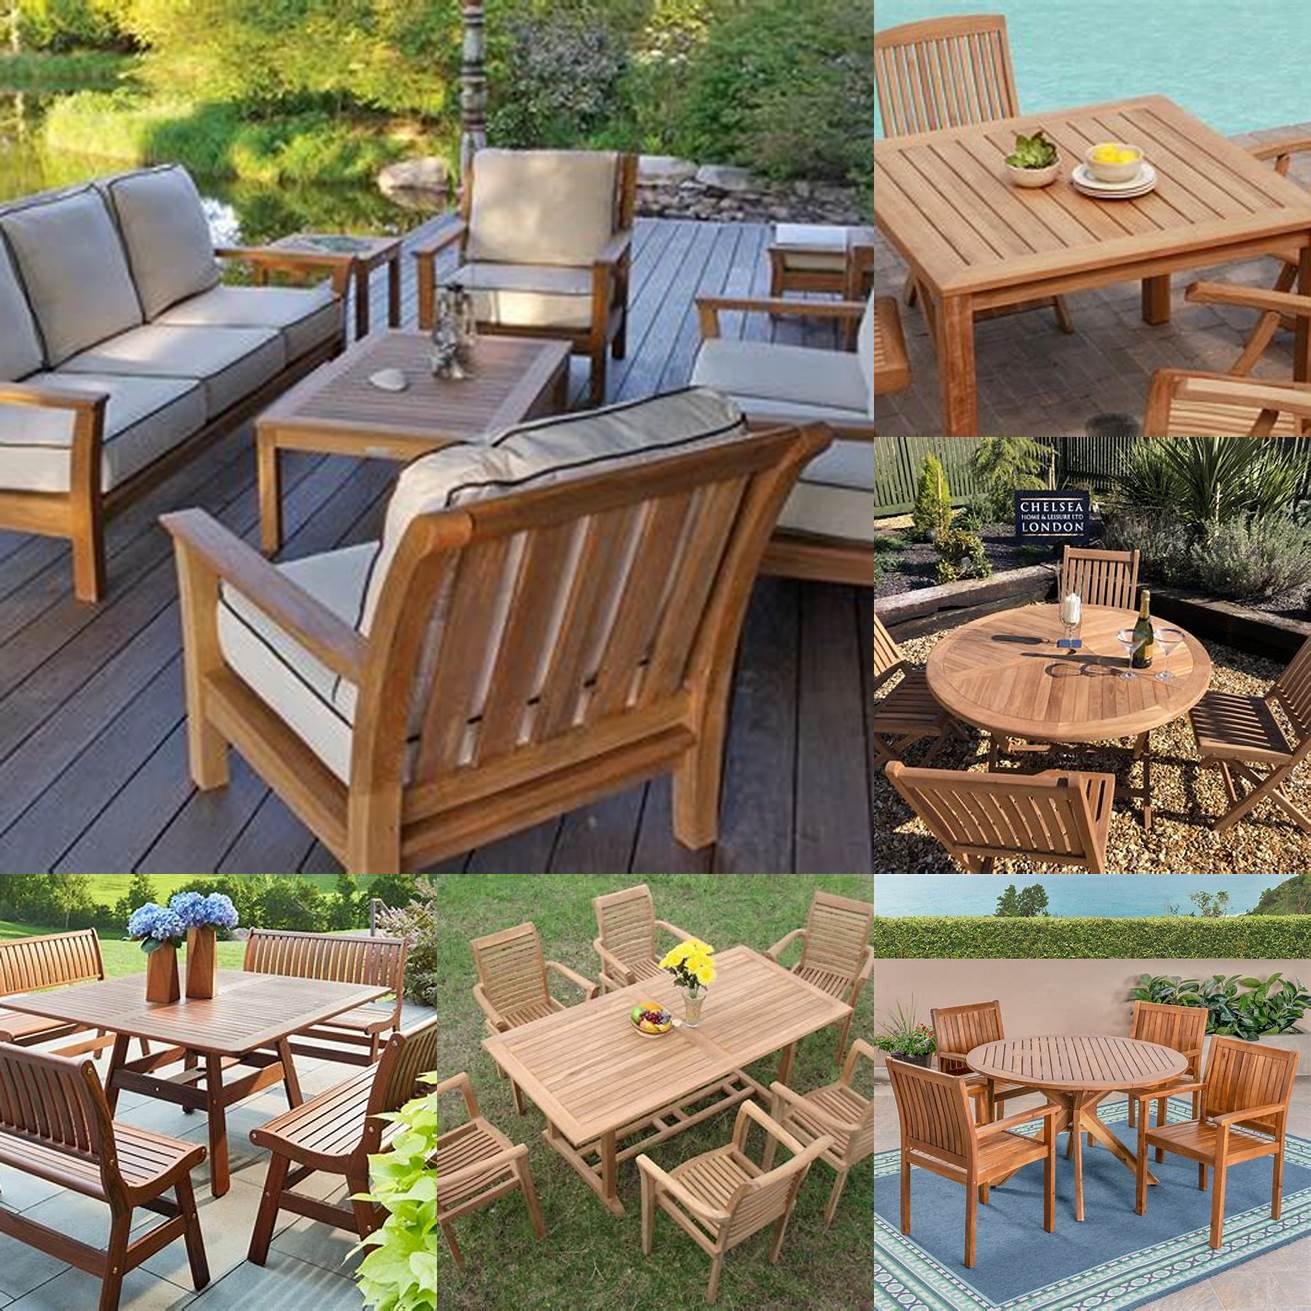 Comparison Pictures of Teak and Other Types of Outdoor Furniture